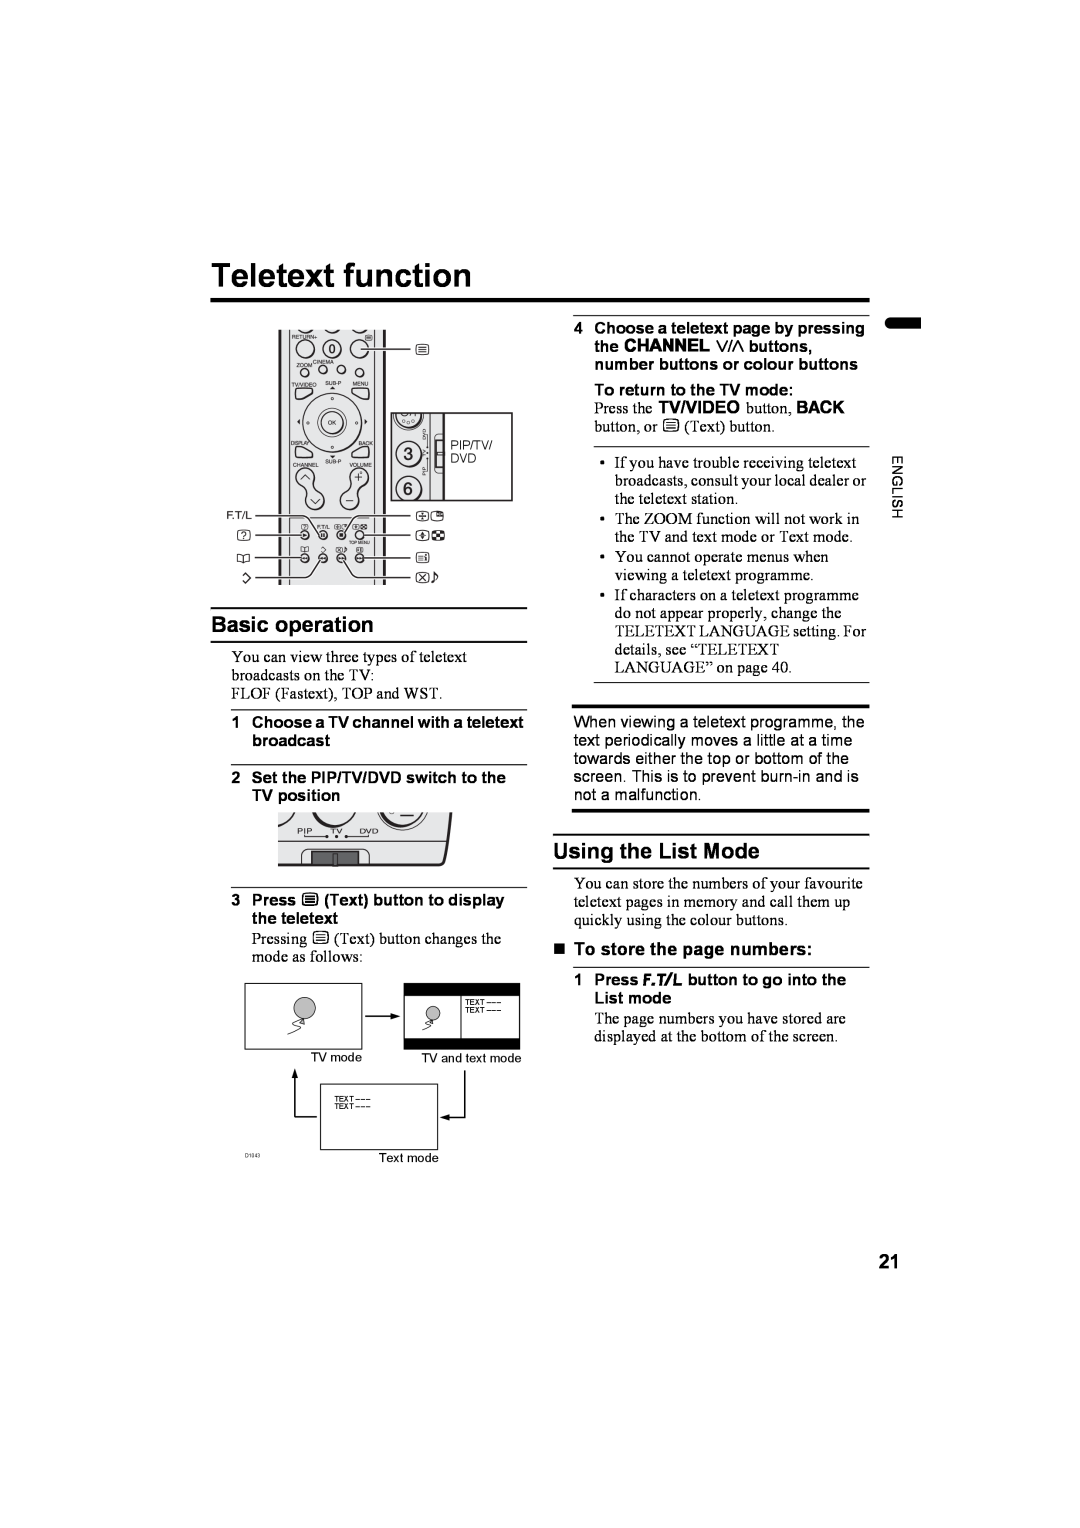 JVC LCT1774-001A, 1004MKH-CR-VP manual Teletext function, Basic operation, Using the List Mode, „ To store the page numbers 